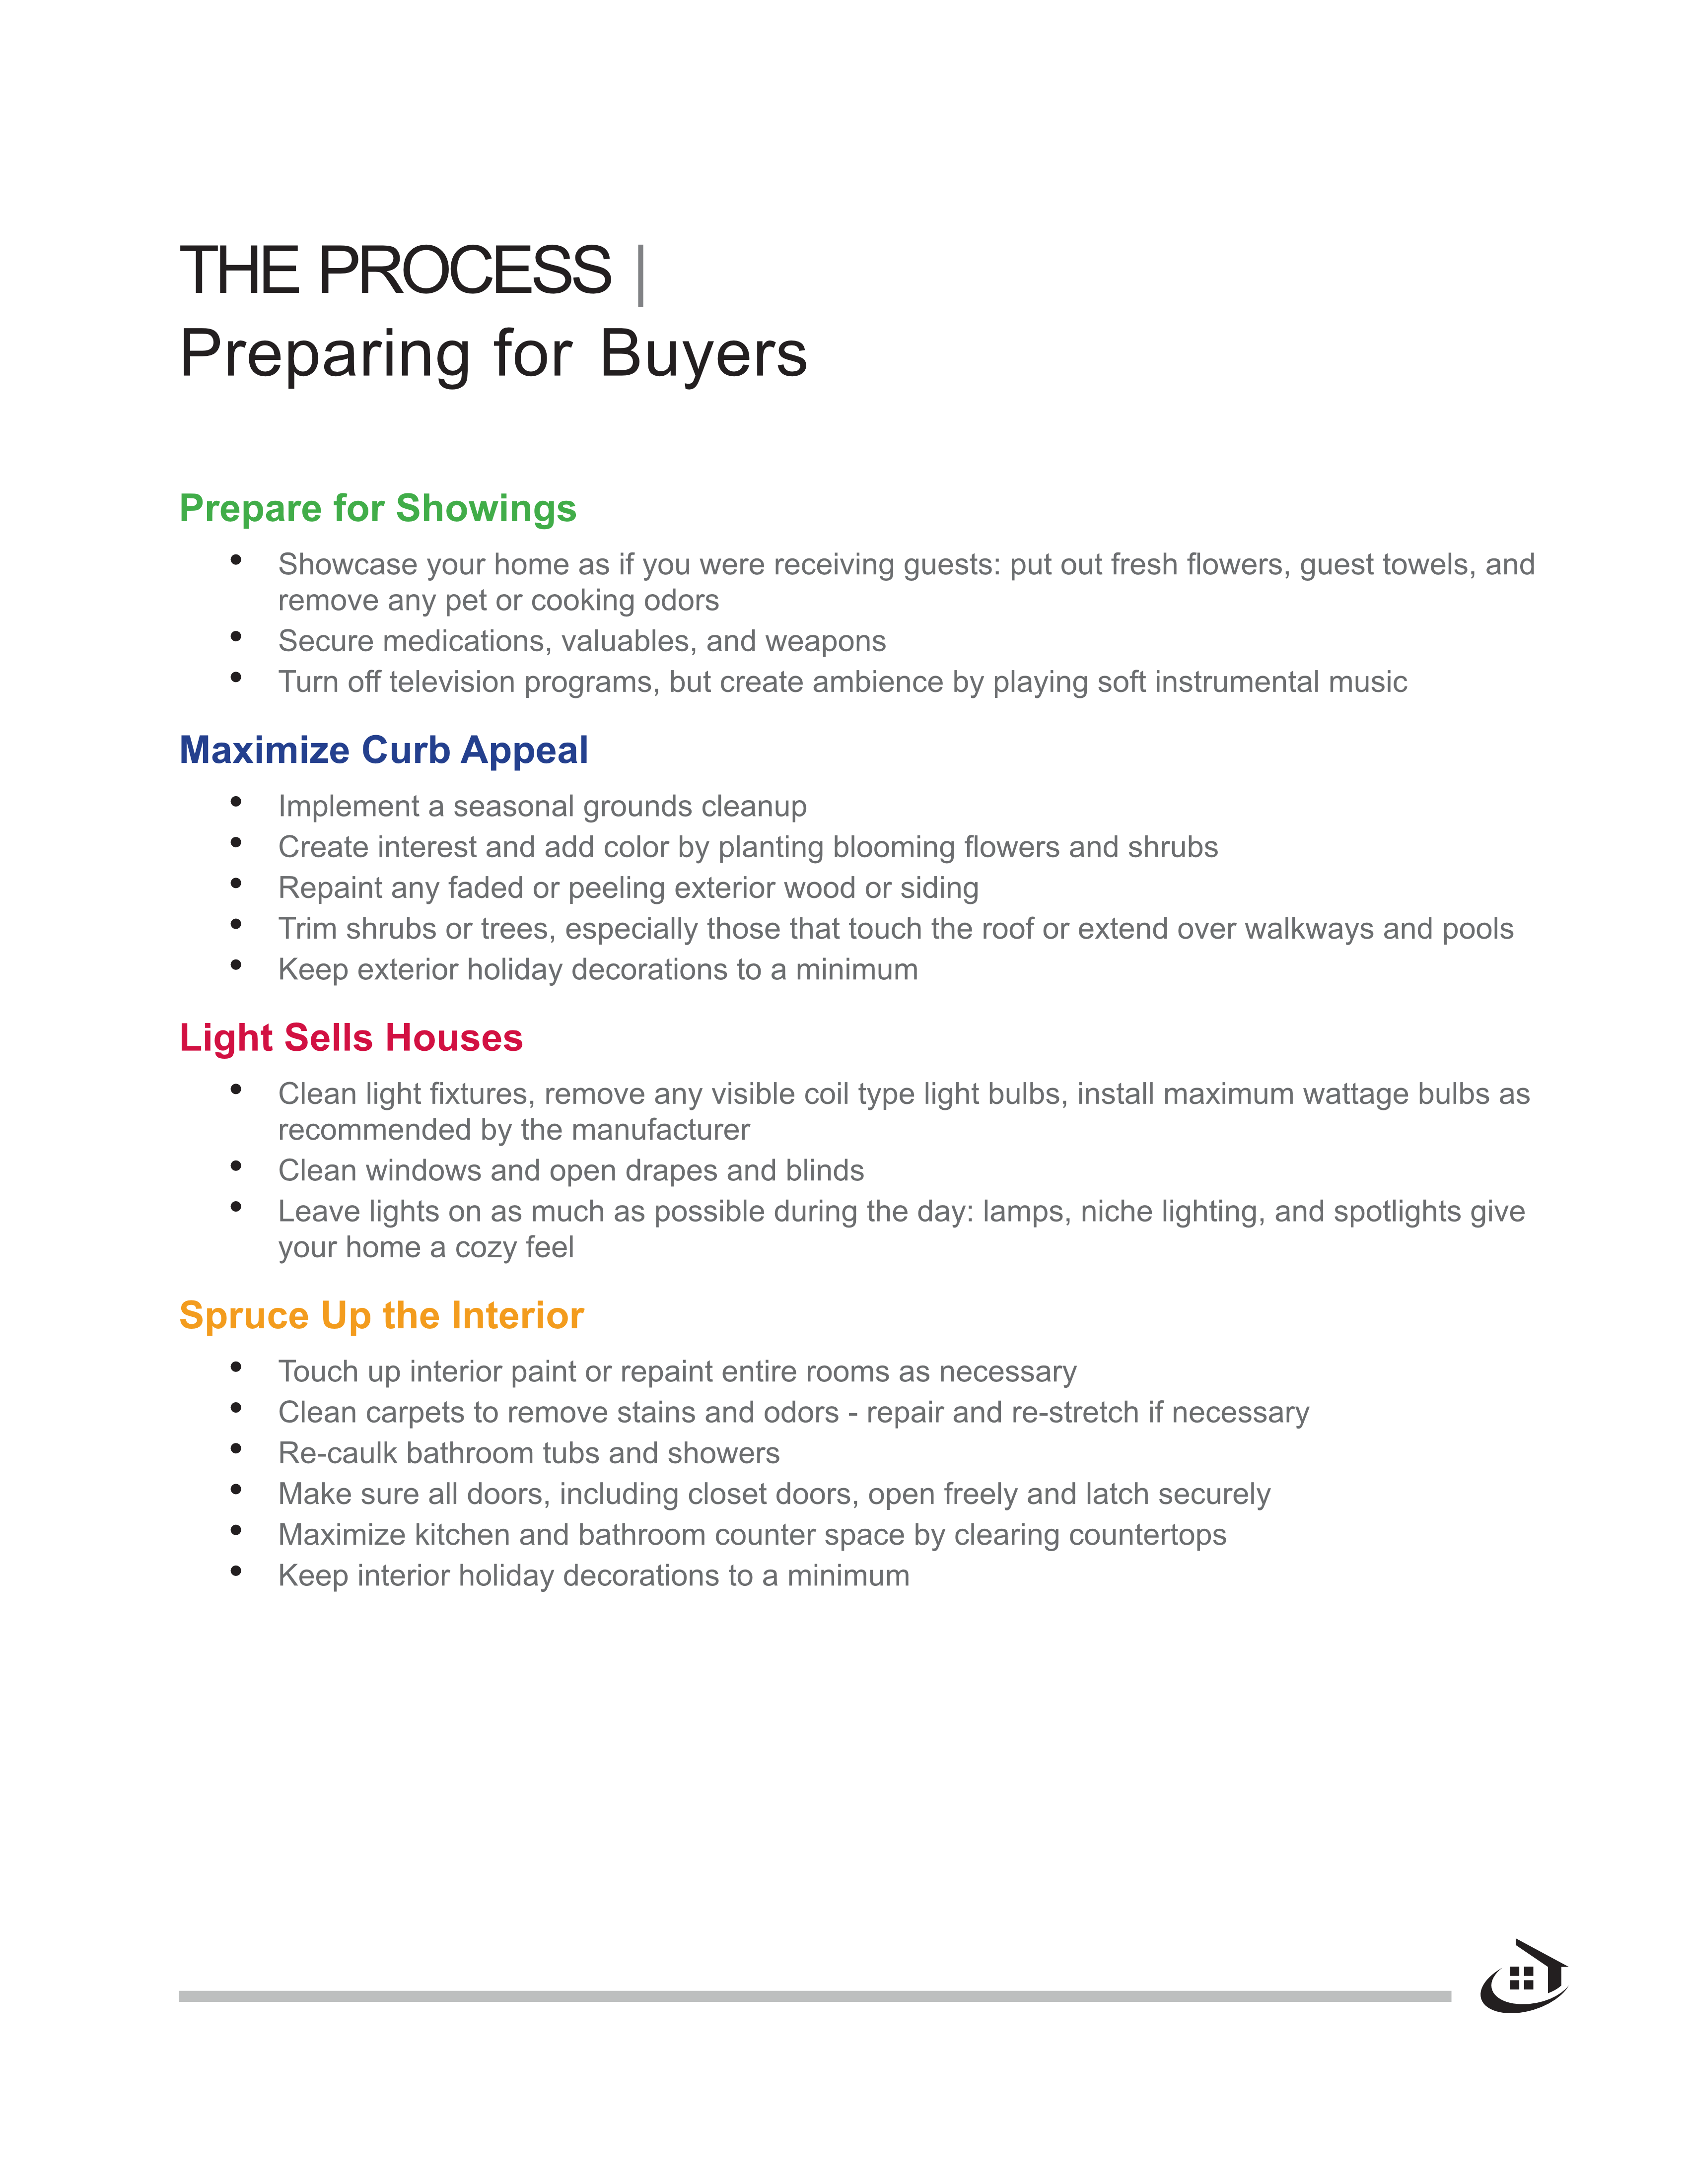 The Selling Process3-Preparing for Buyers